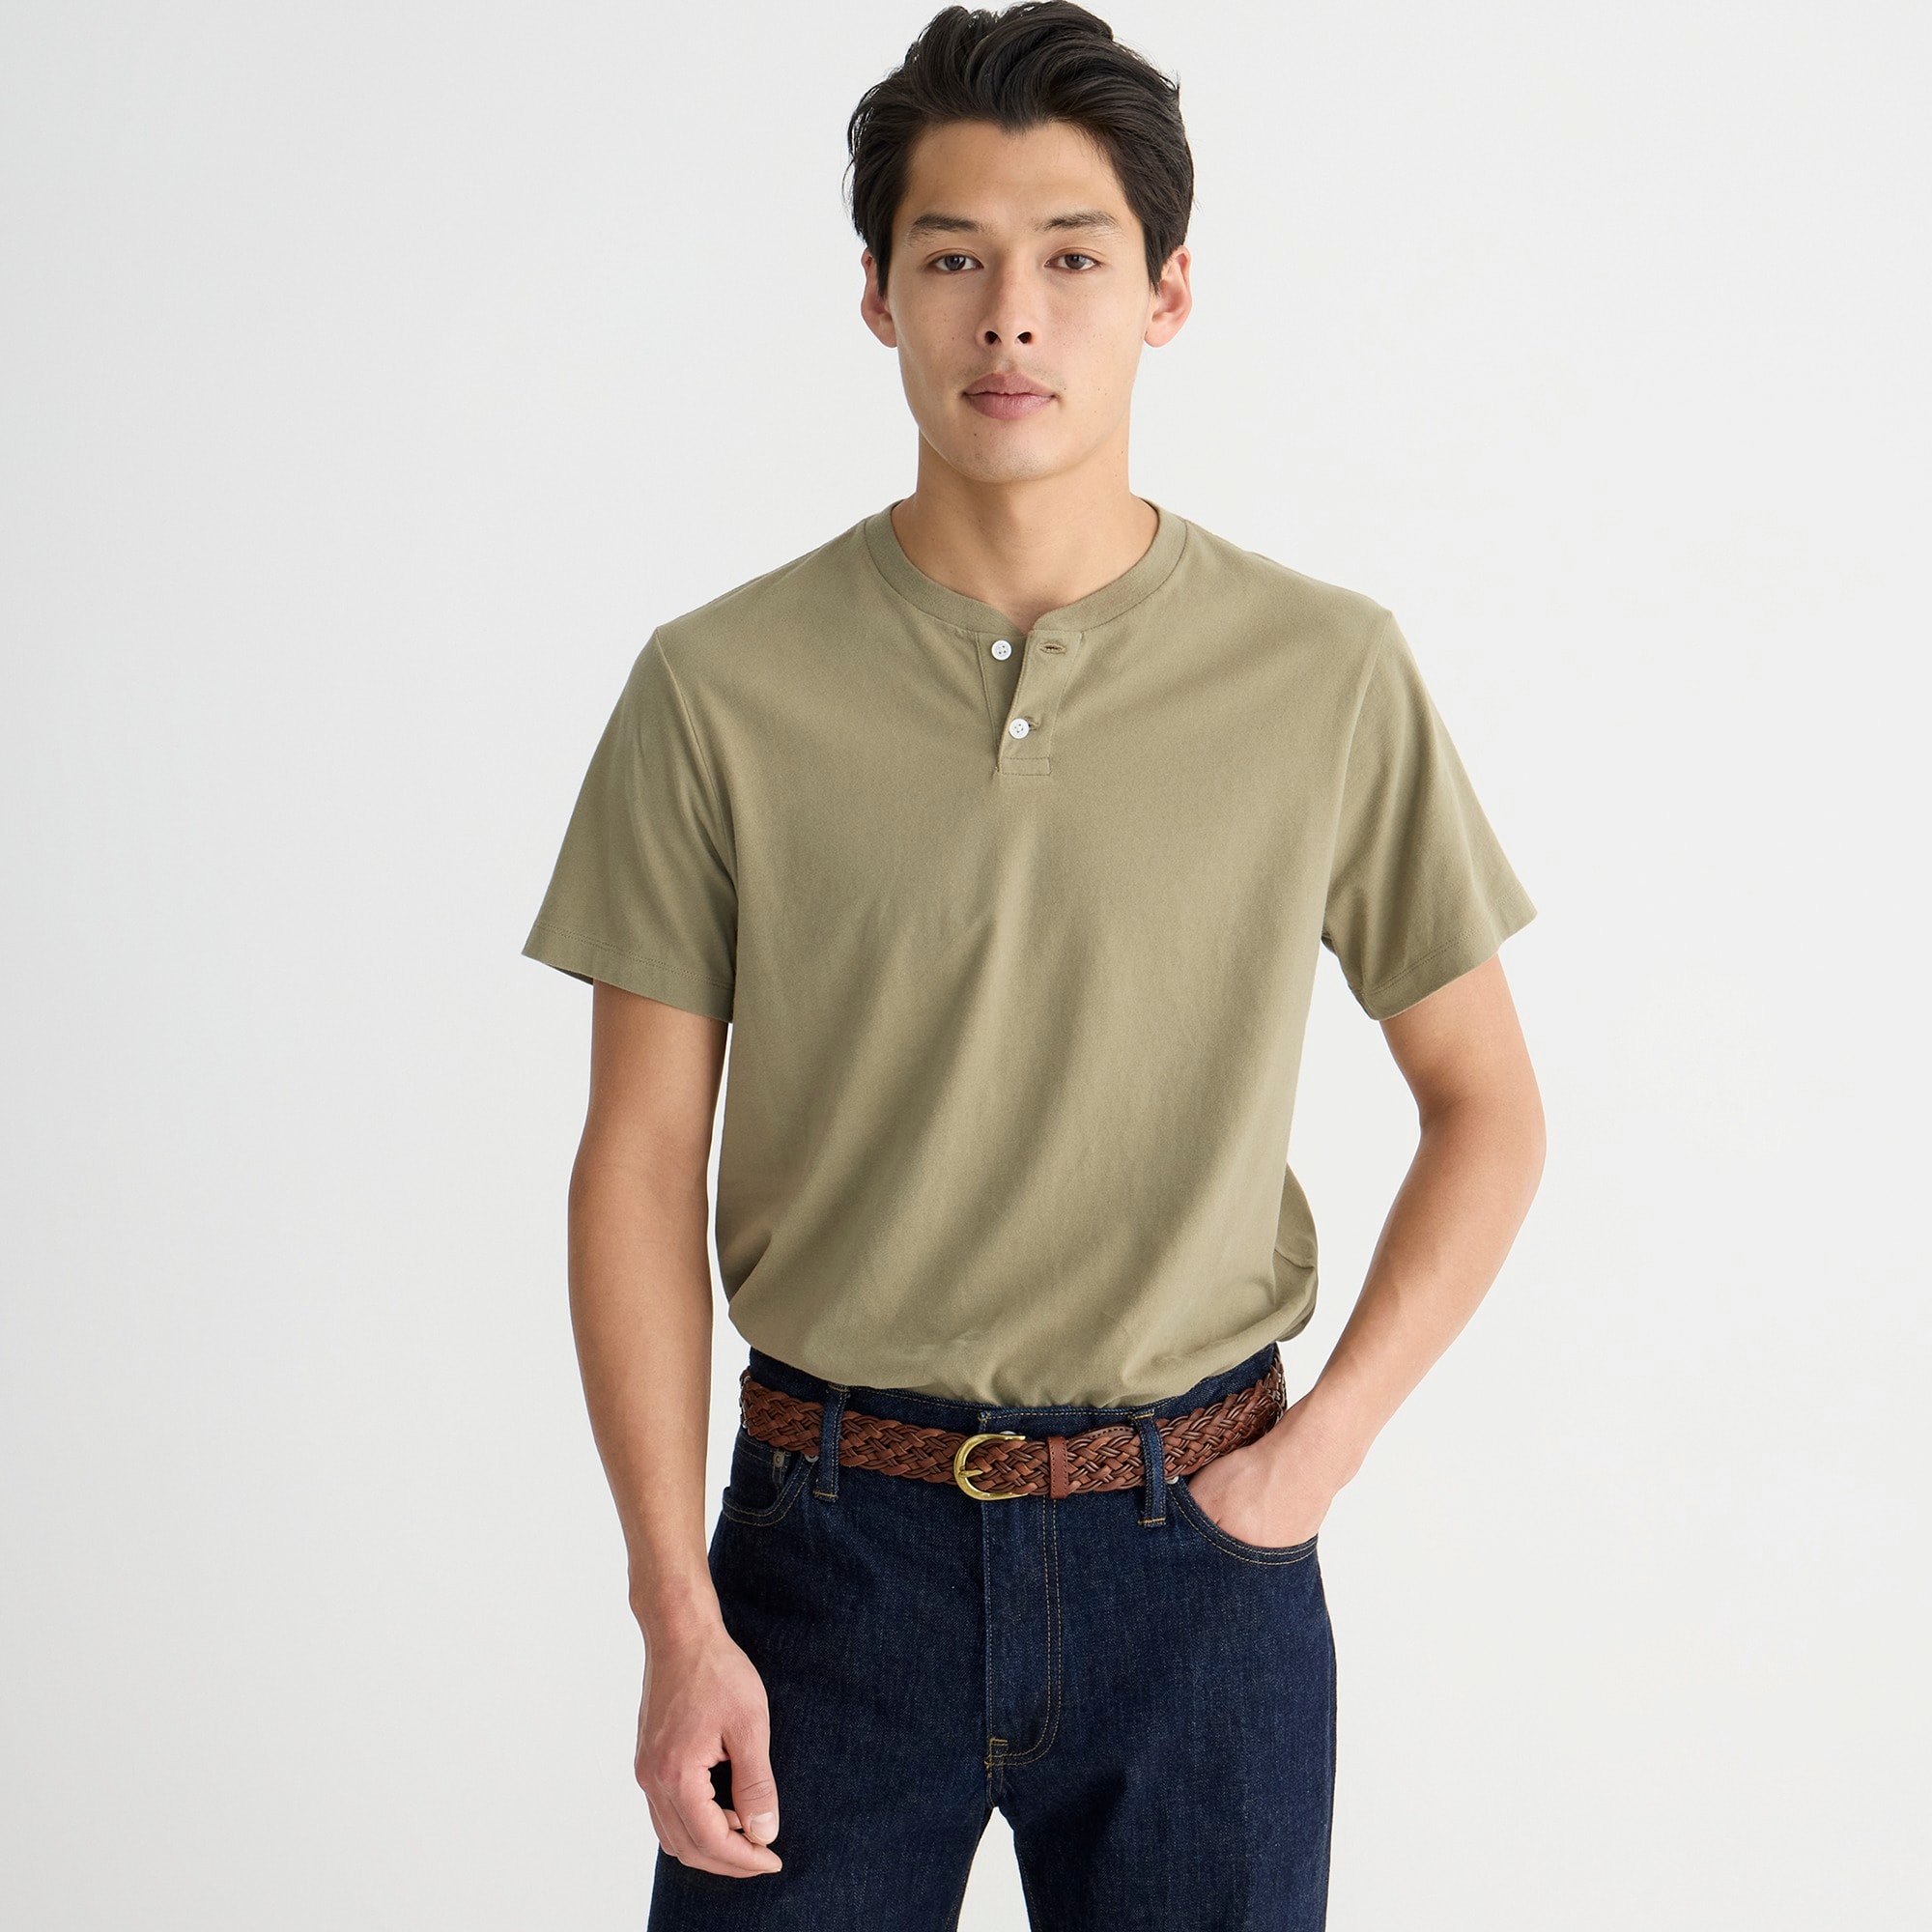  Tall short-sleeve sueded cotton henley